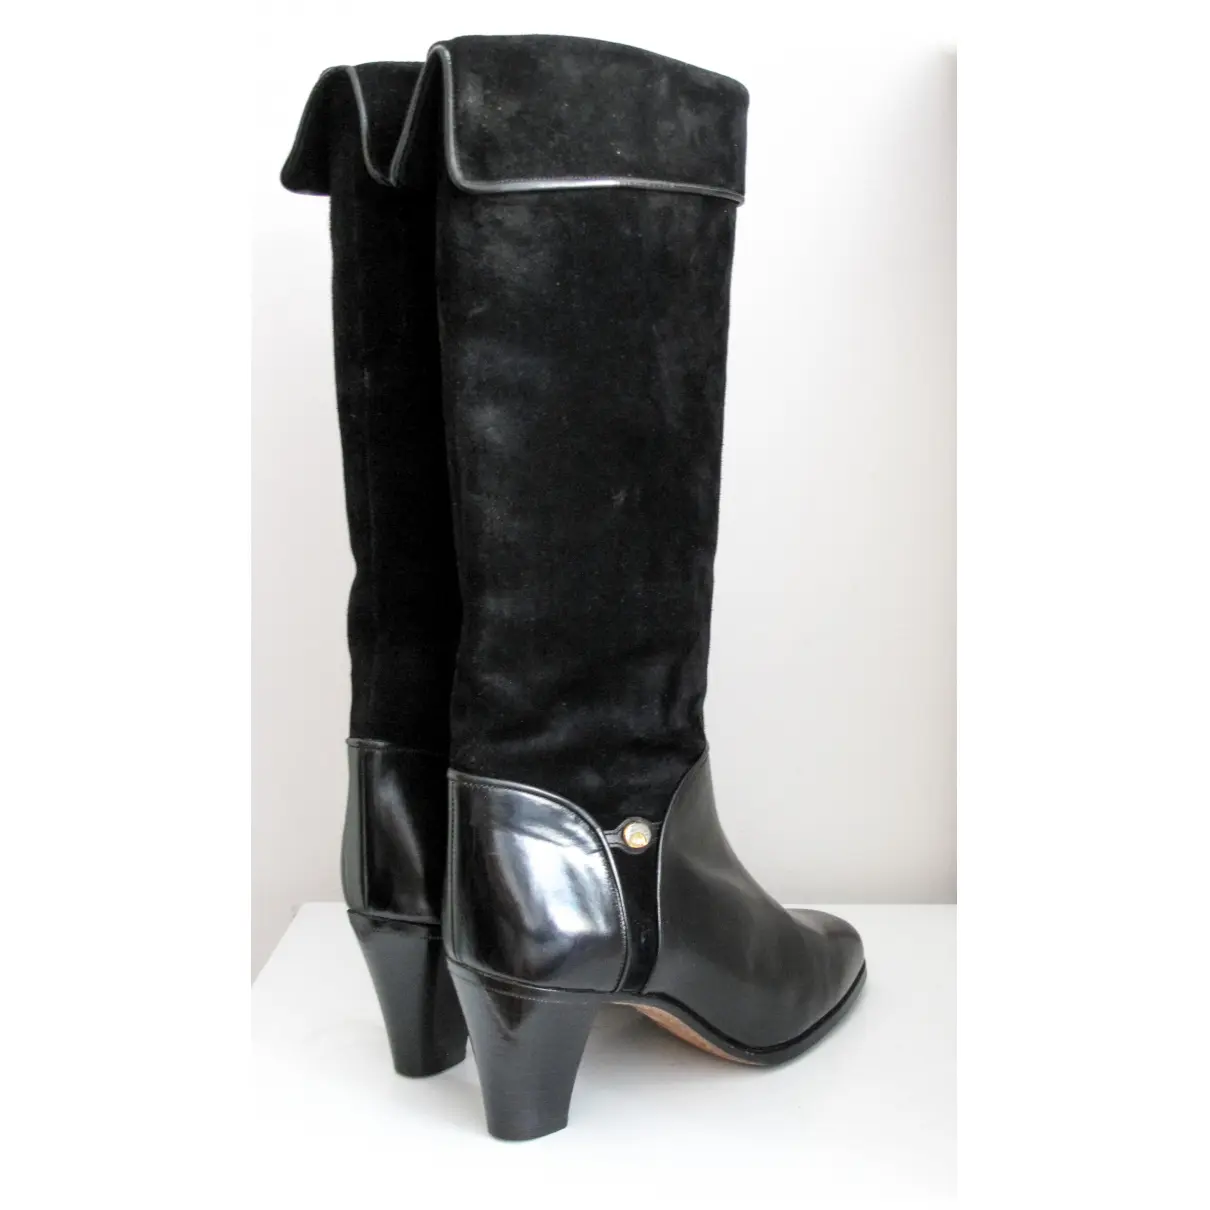 Riding boots Gucci - Vintage